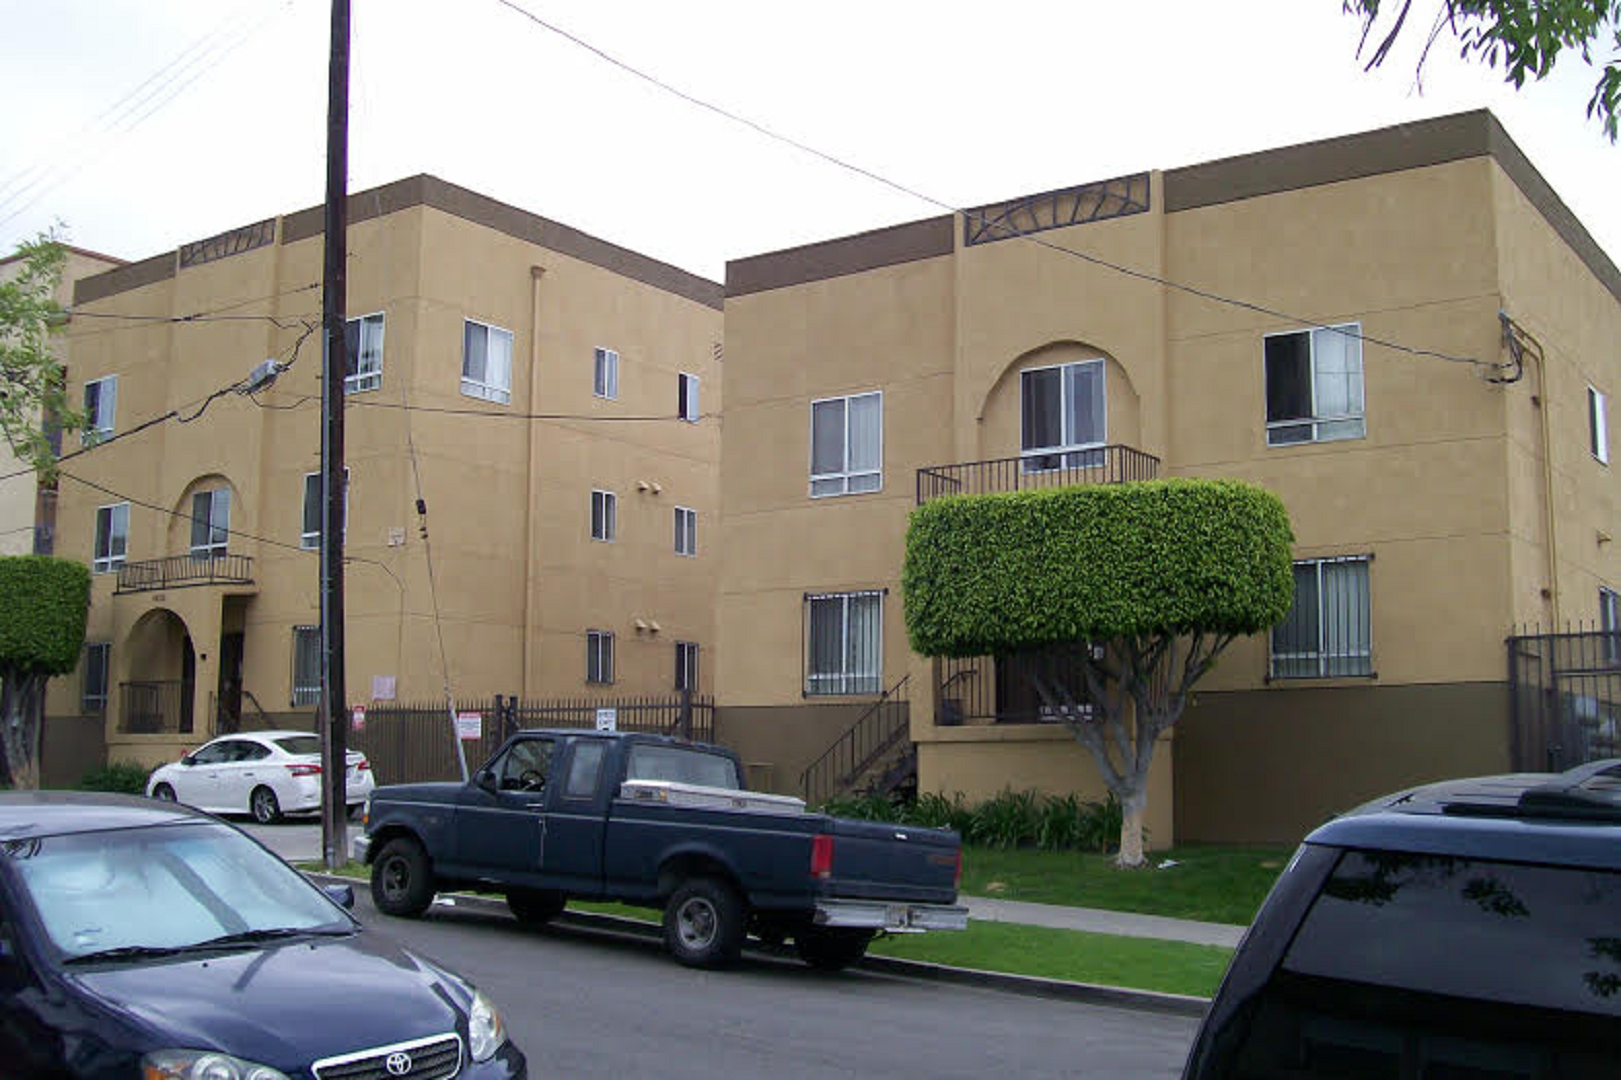 Right side view of two-building next to each other with a gated parking door in the middle, left side building is a three story and right side is a two story, multiple windows, bottom windows are gated, both building have a balcony in the middle, parked c